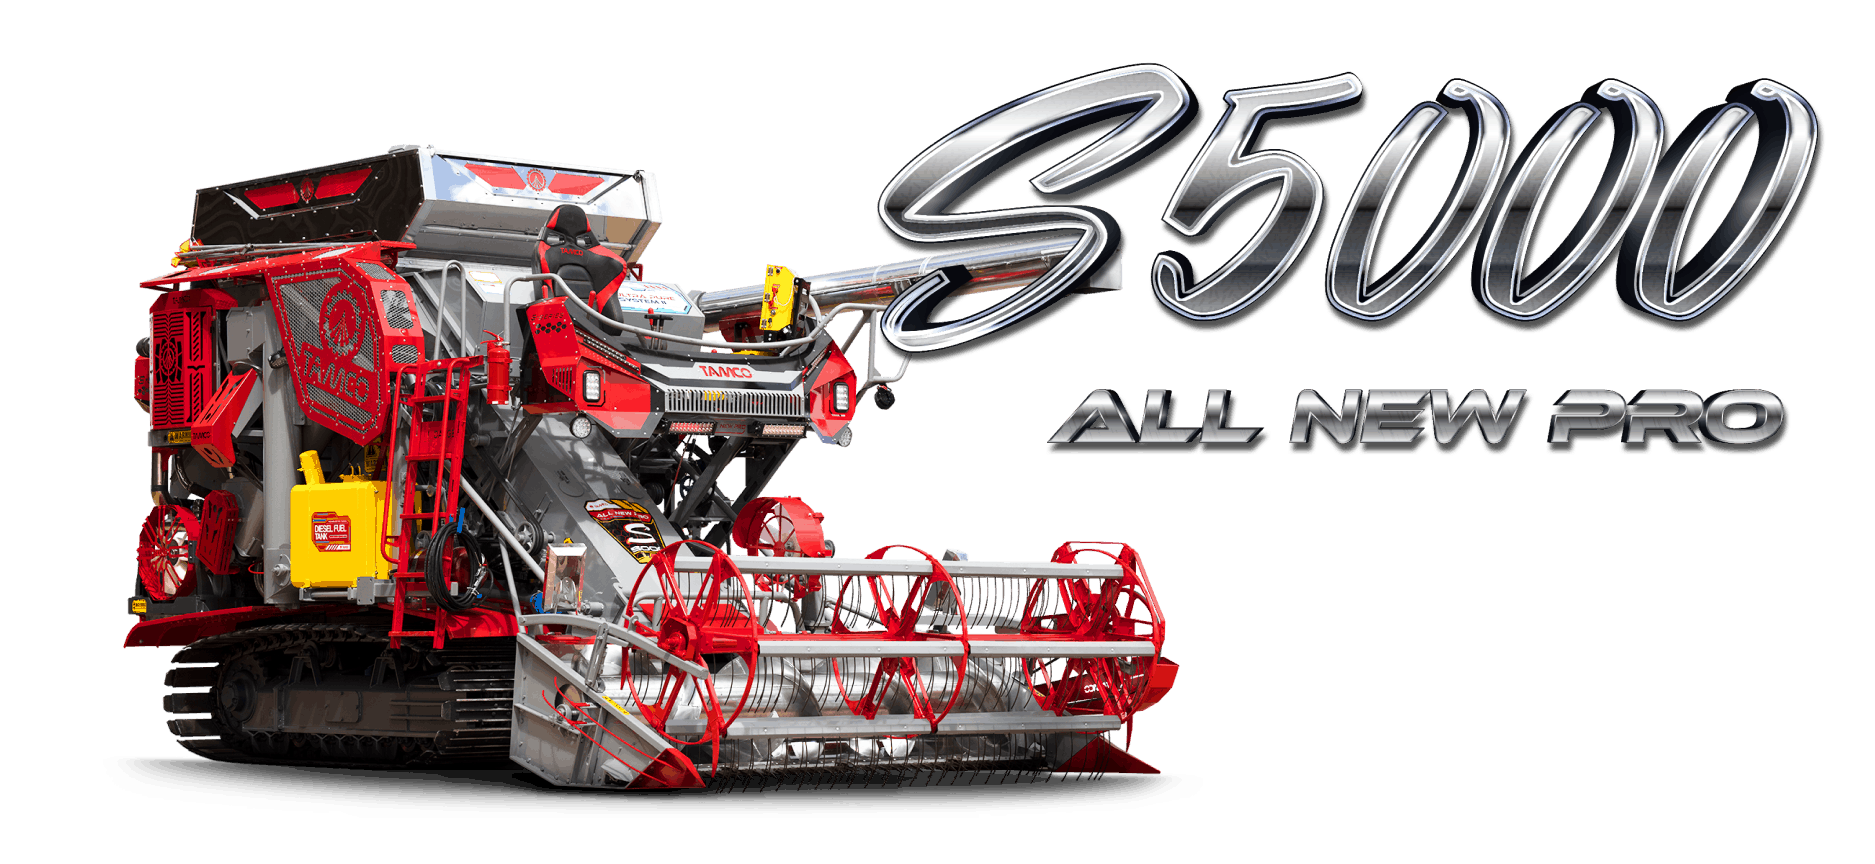 S5000-all-new-pro